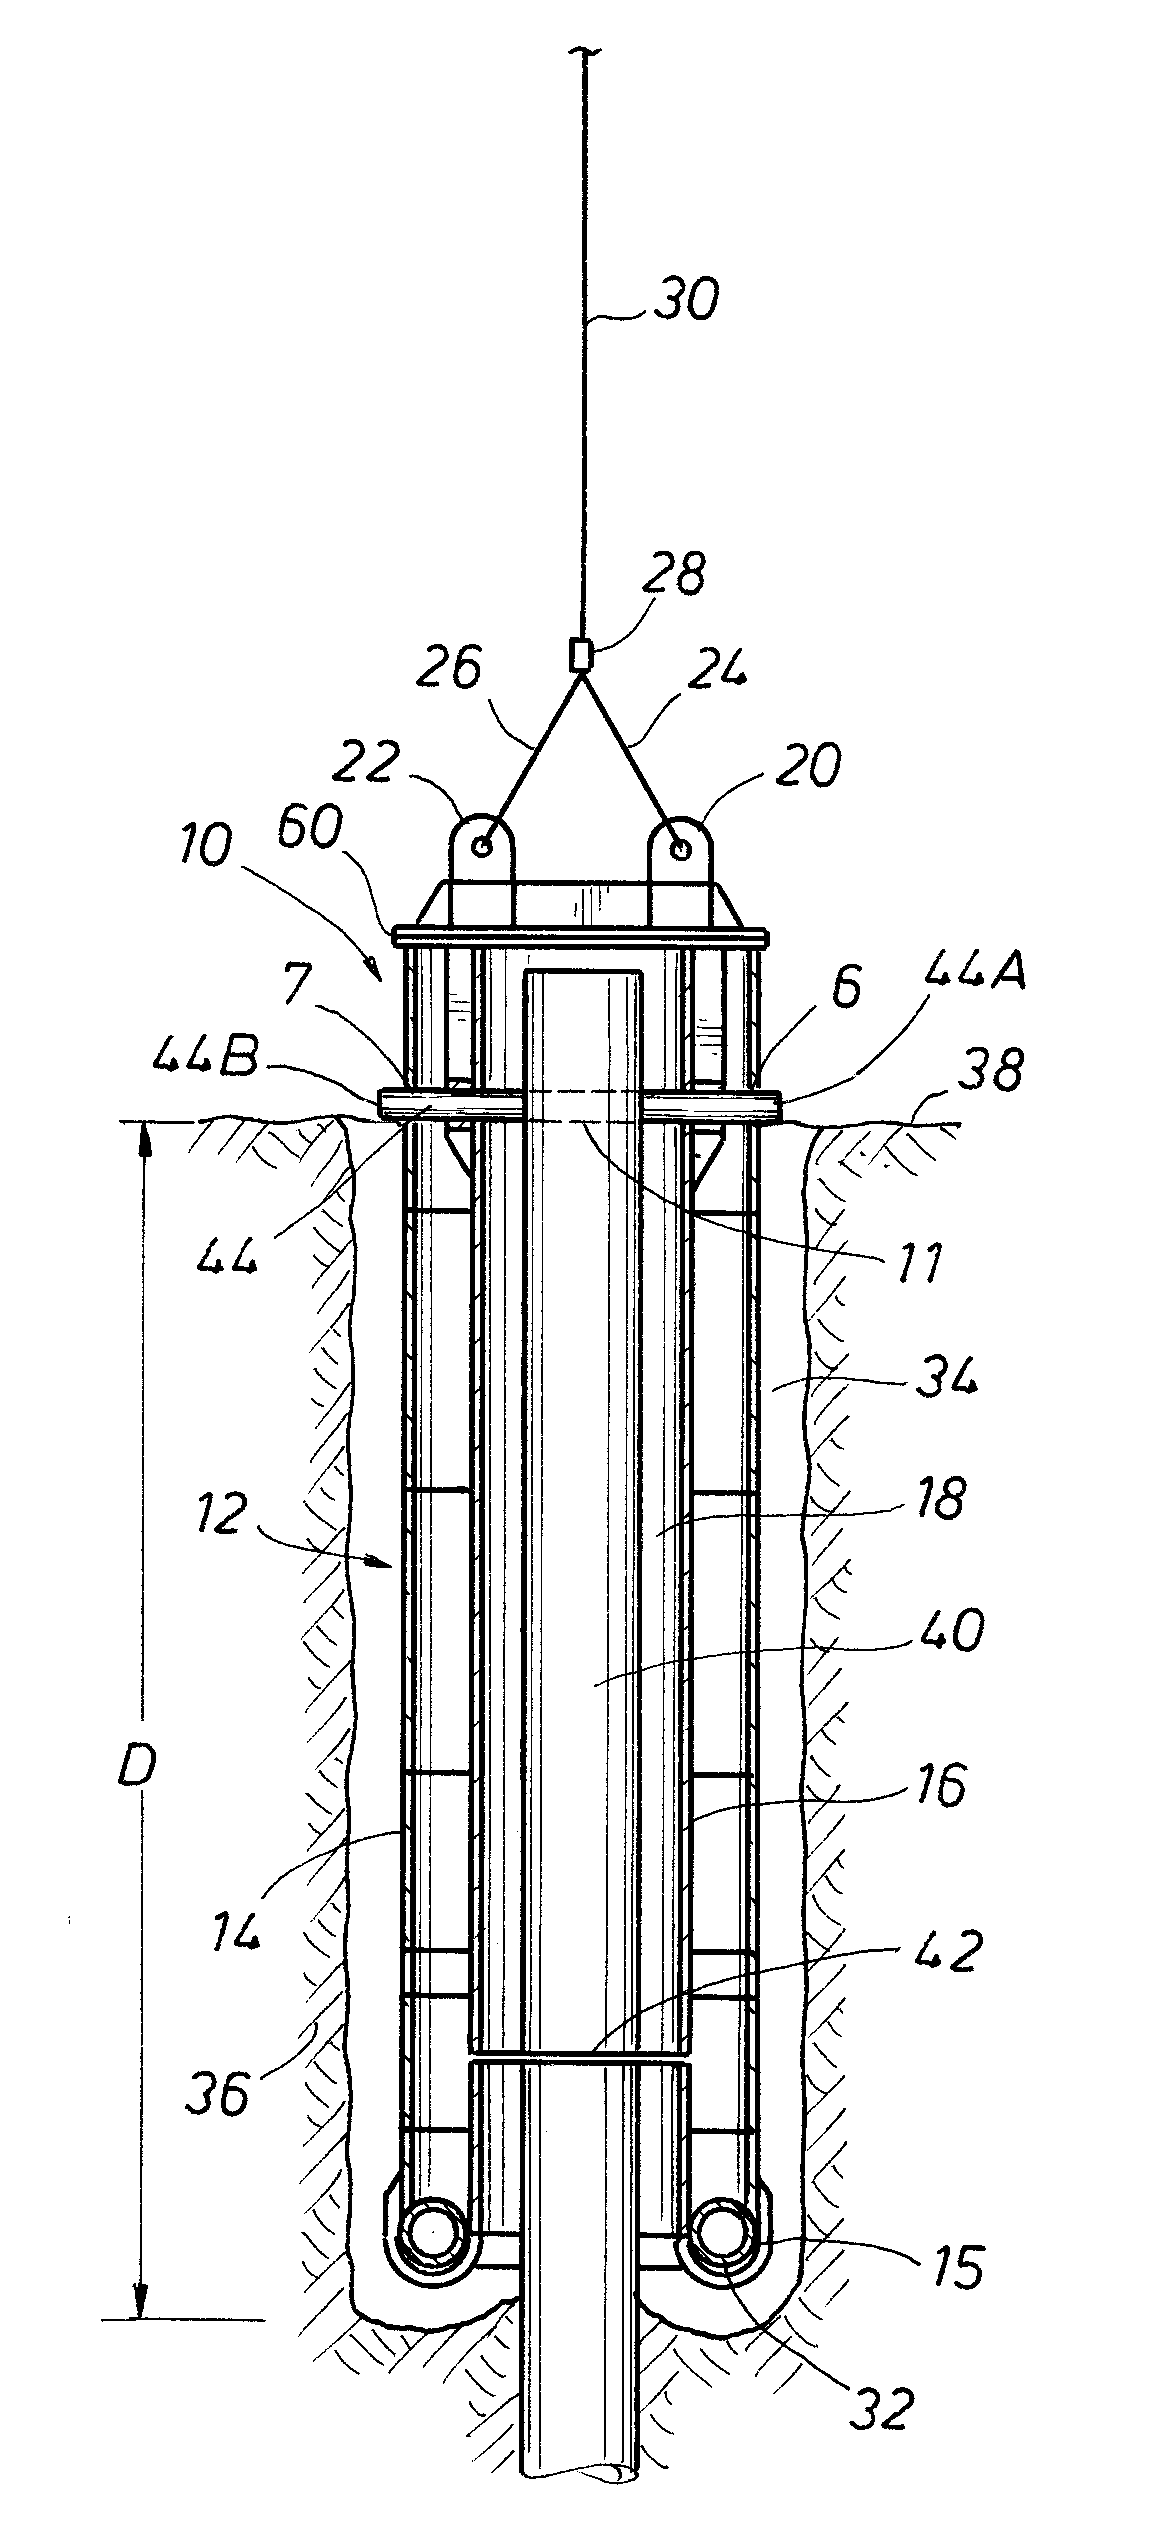 Apparatus and Method for Removing Subsea Structures